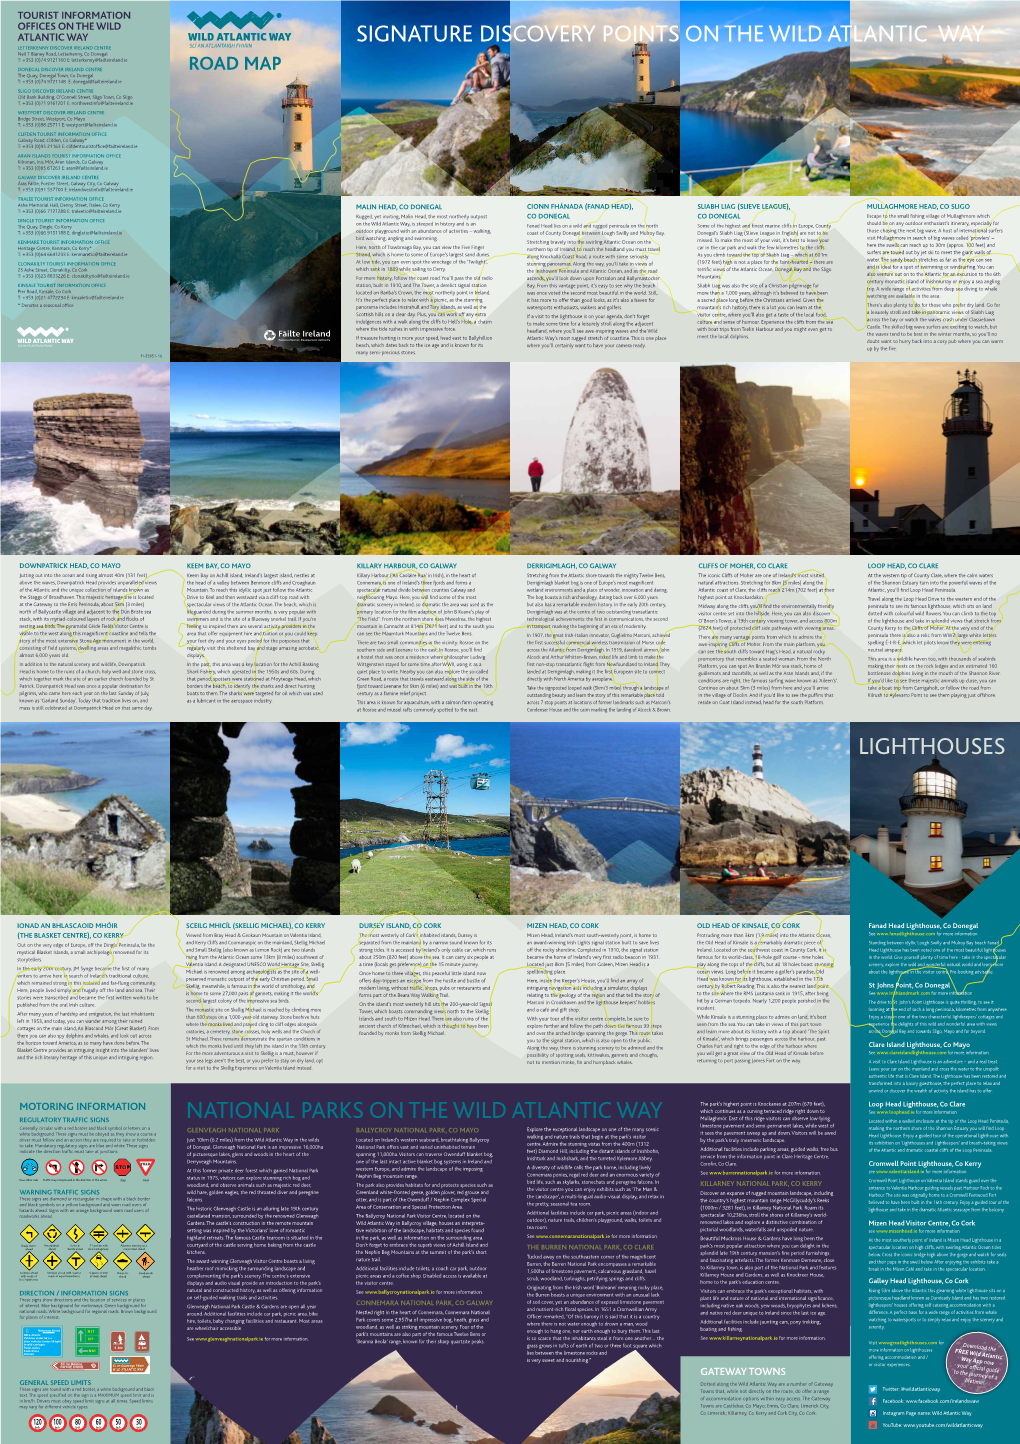 Tourist Information Offices on the Wild Atlantic Way Motoring Information